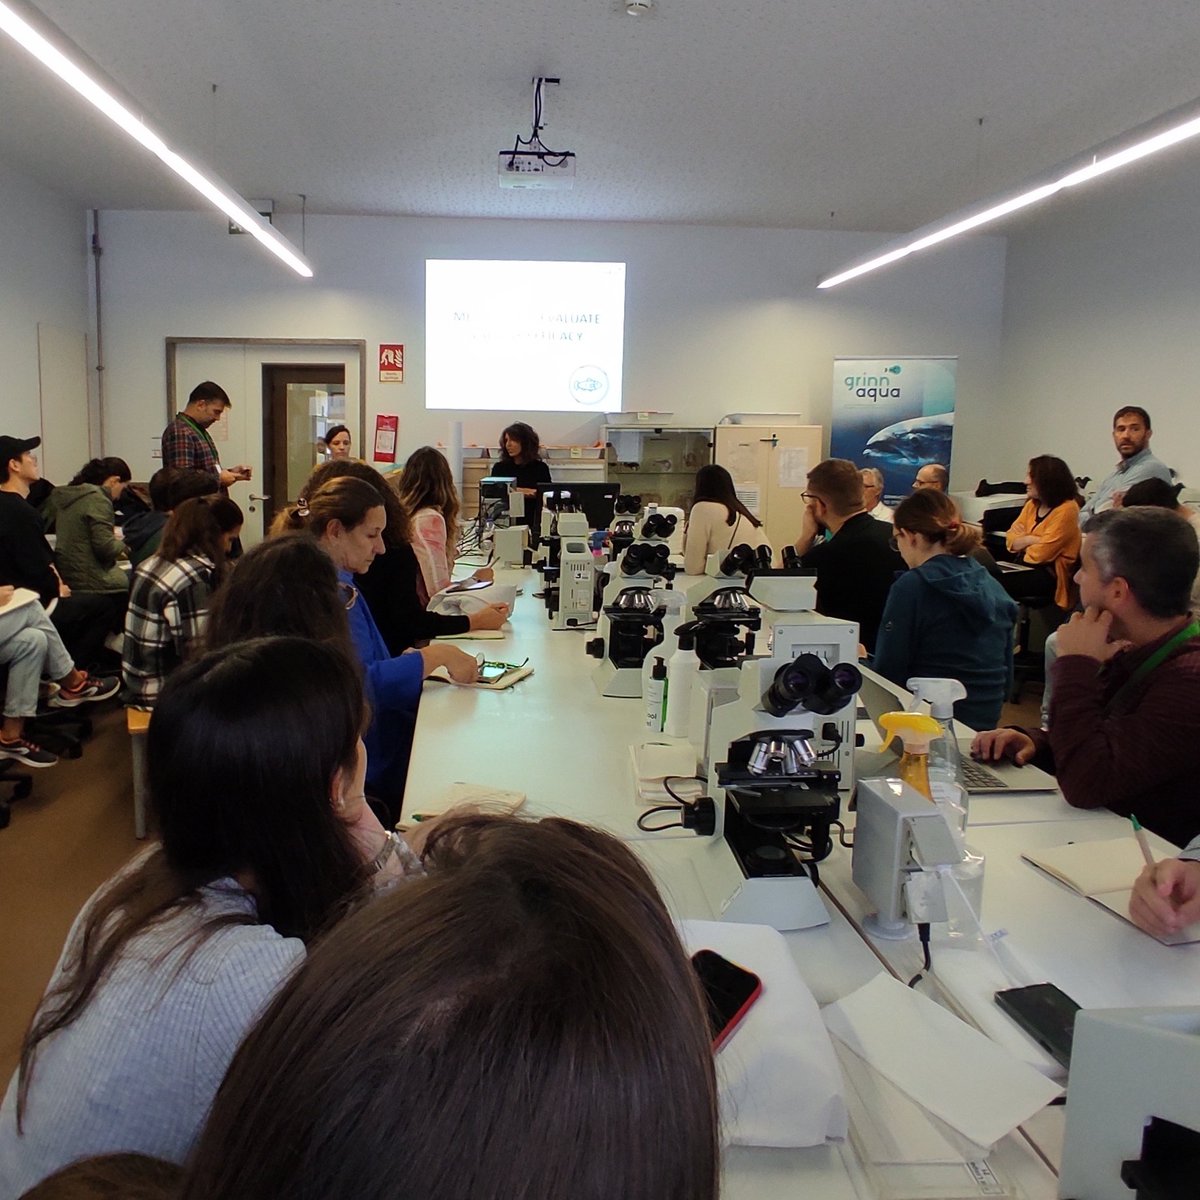 ✨ It's the final stretch of our 2-day workshop, and Carolina Tafalla and Patricia Rosales' presentation on vaccine efficacy is a fitting conclusion. 💉
🧪 We're now equipped to make a difference as we work towards healthier aquaculture

#FishVaccination #FishHealth #Aquaculture